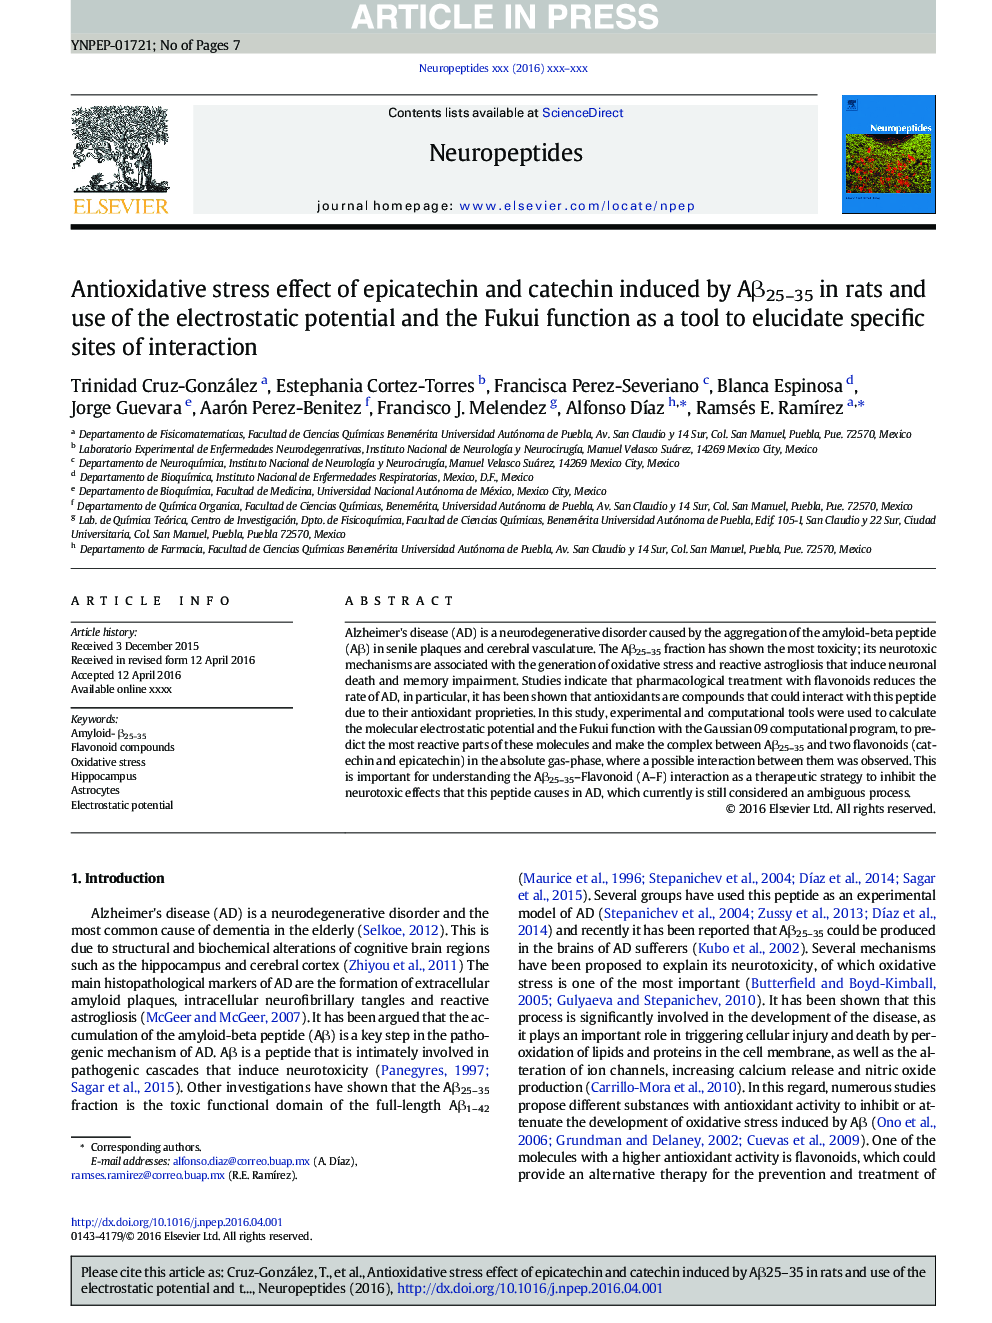 Antioxidative stress effect of epicatechin and catechin induced by AÎ²25-35 in rats and use of the electrostatic potential and the Fukui function as a tool to elucidate specific sites of interaction